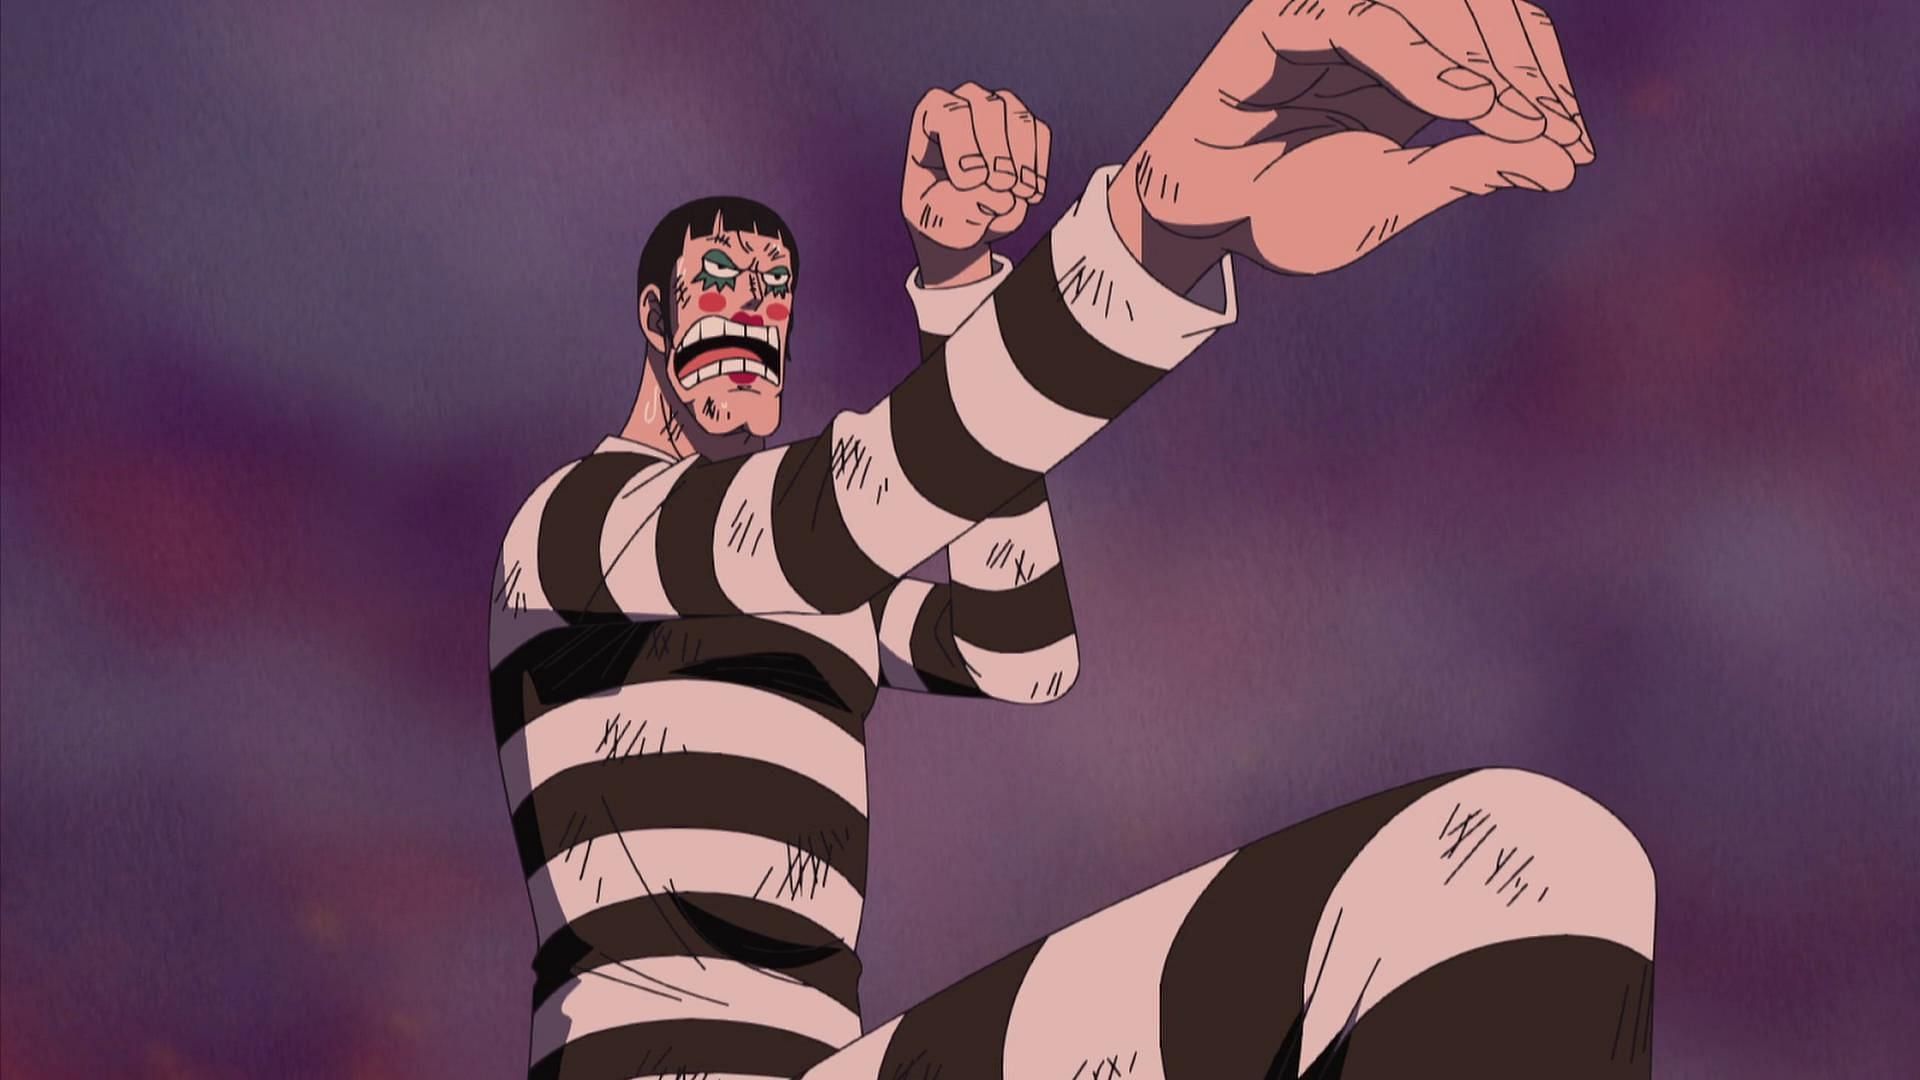 Bon Clay as seen in the anime series (Image via Toei Animation)